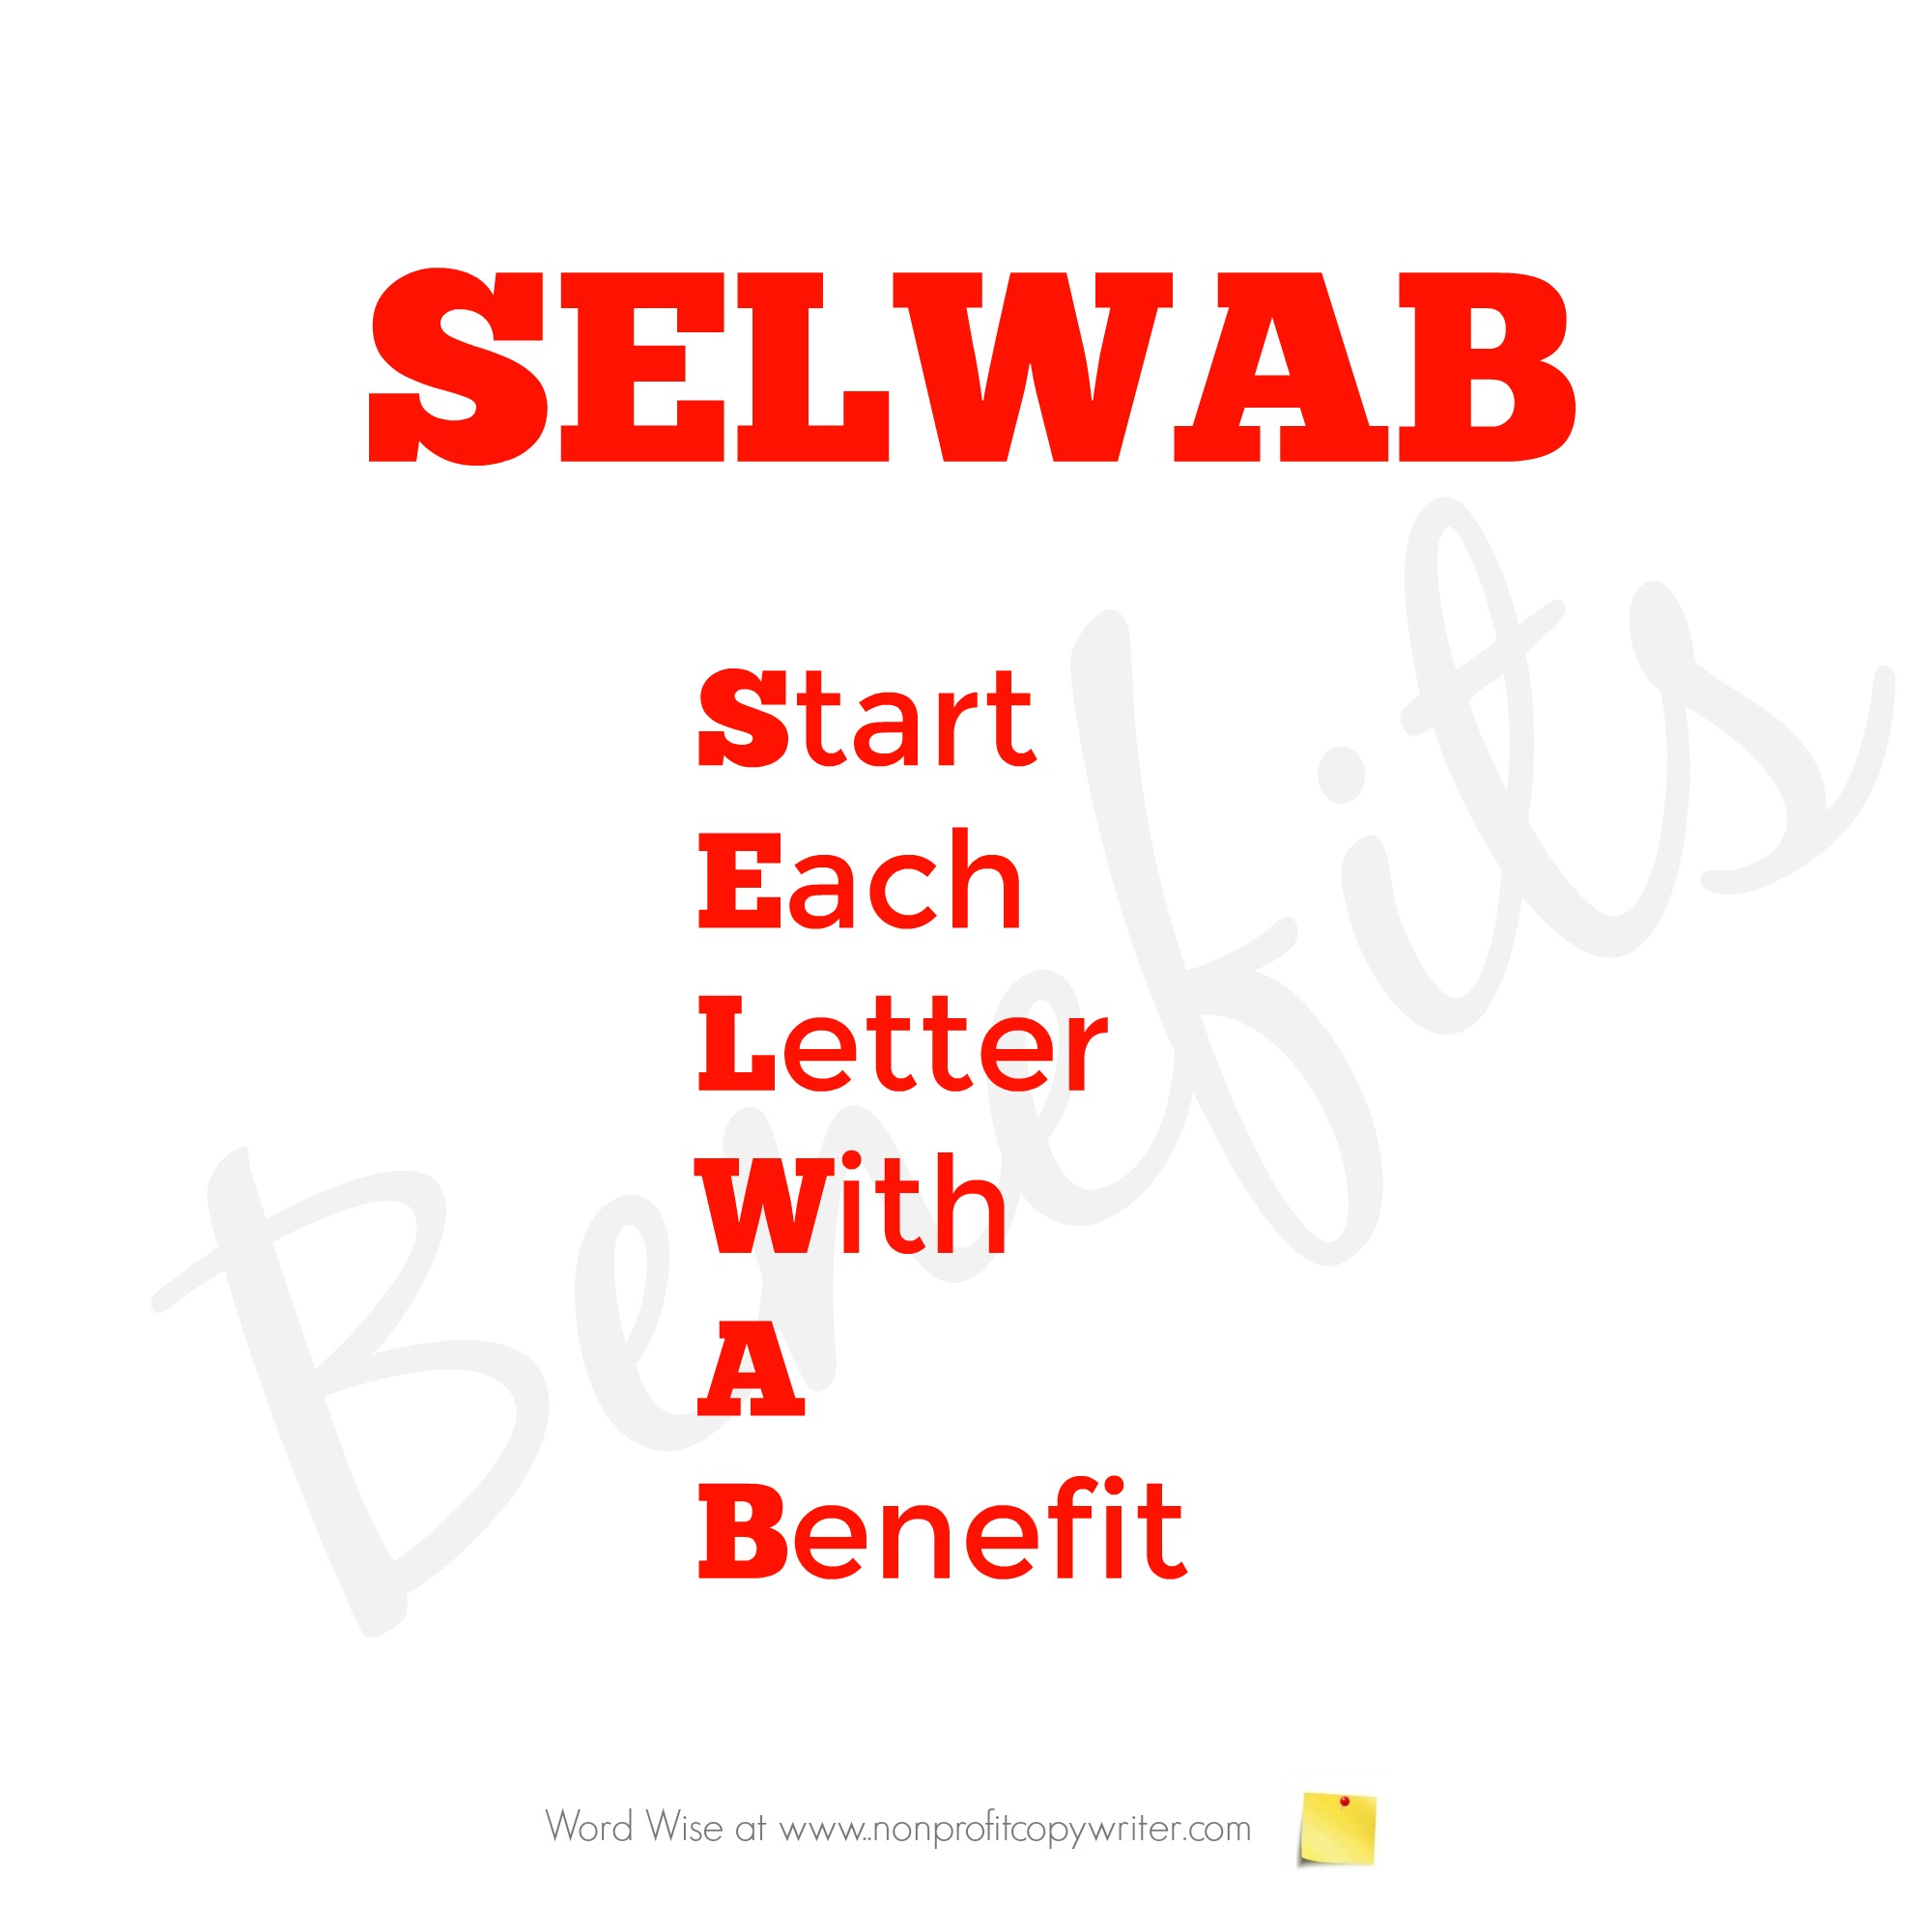 The SELWAB Formula with Word Wise at Nonprofit Copywriter